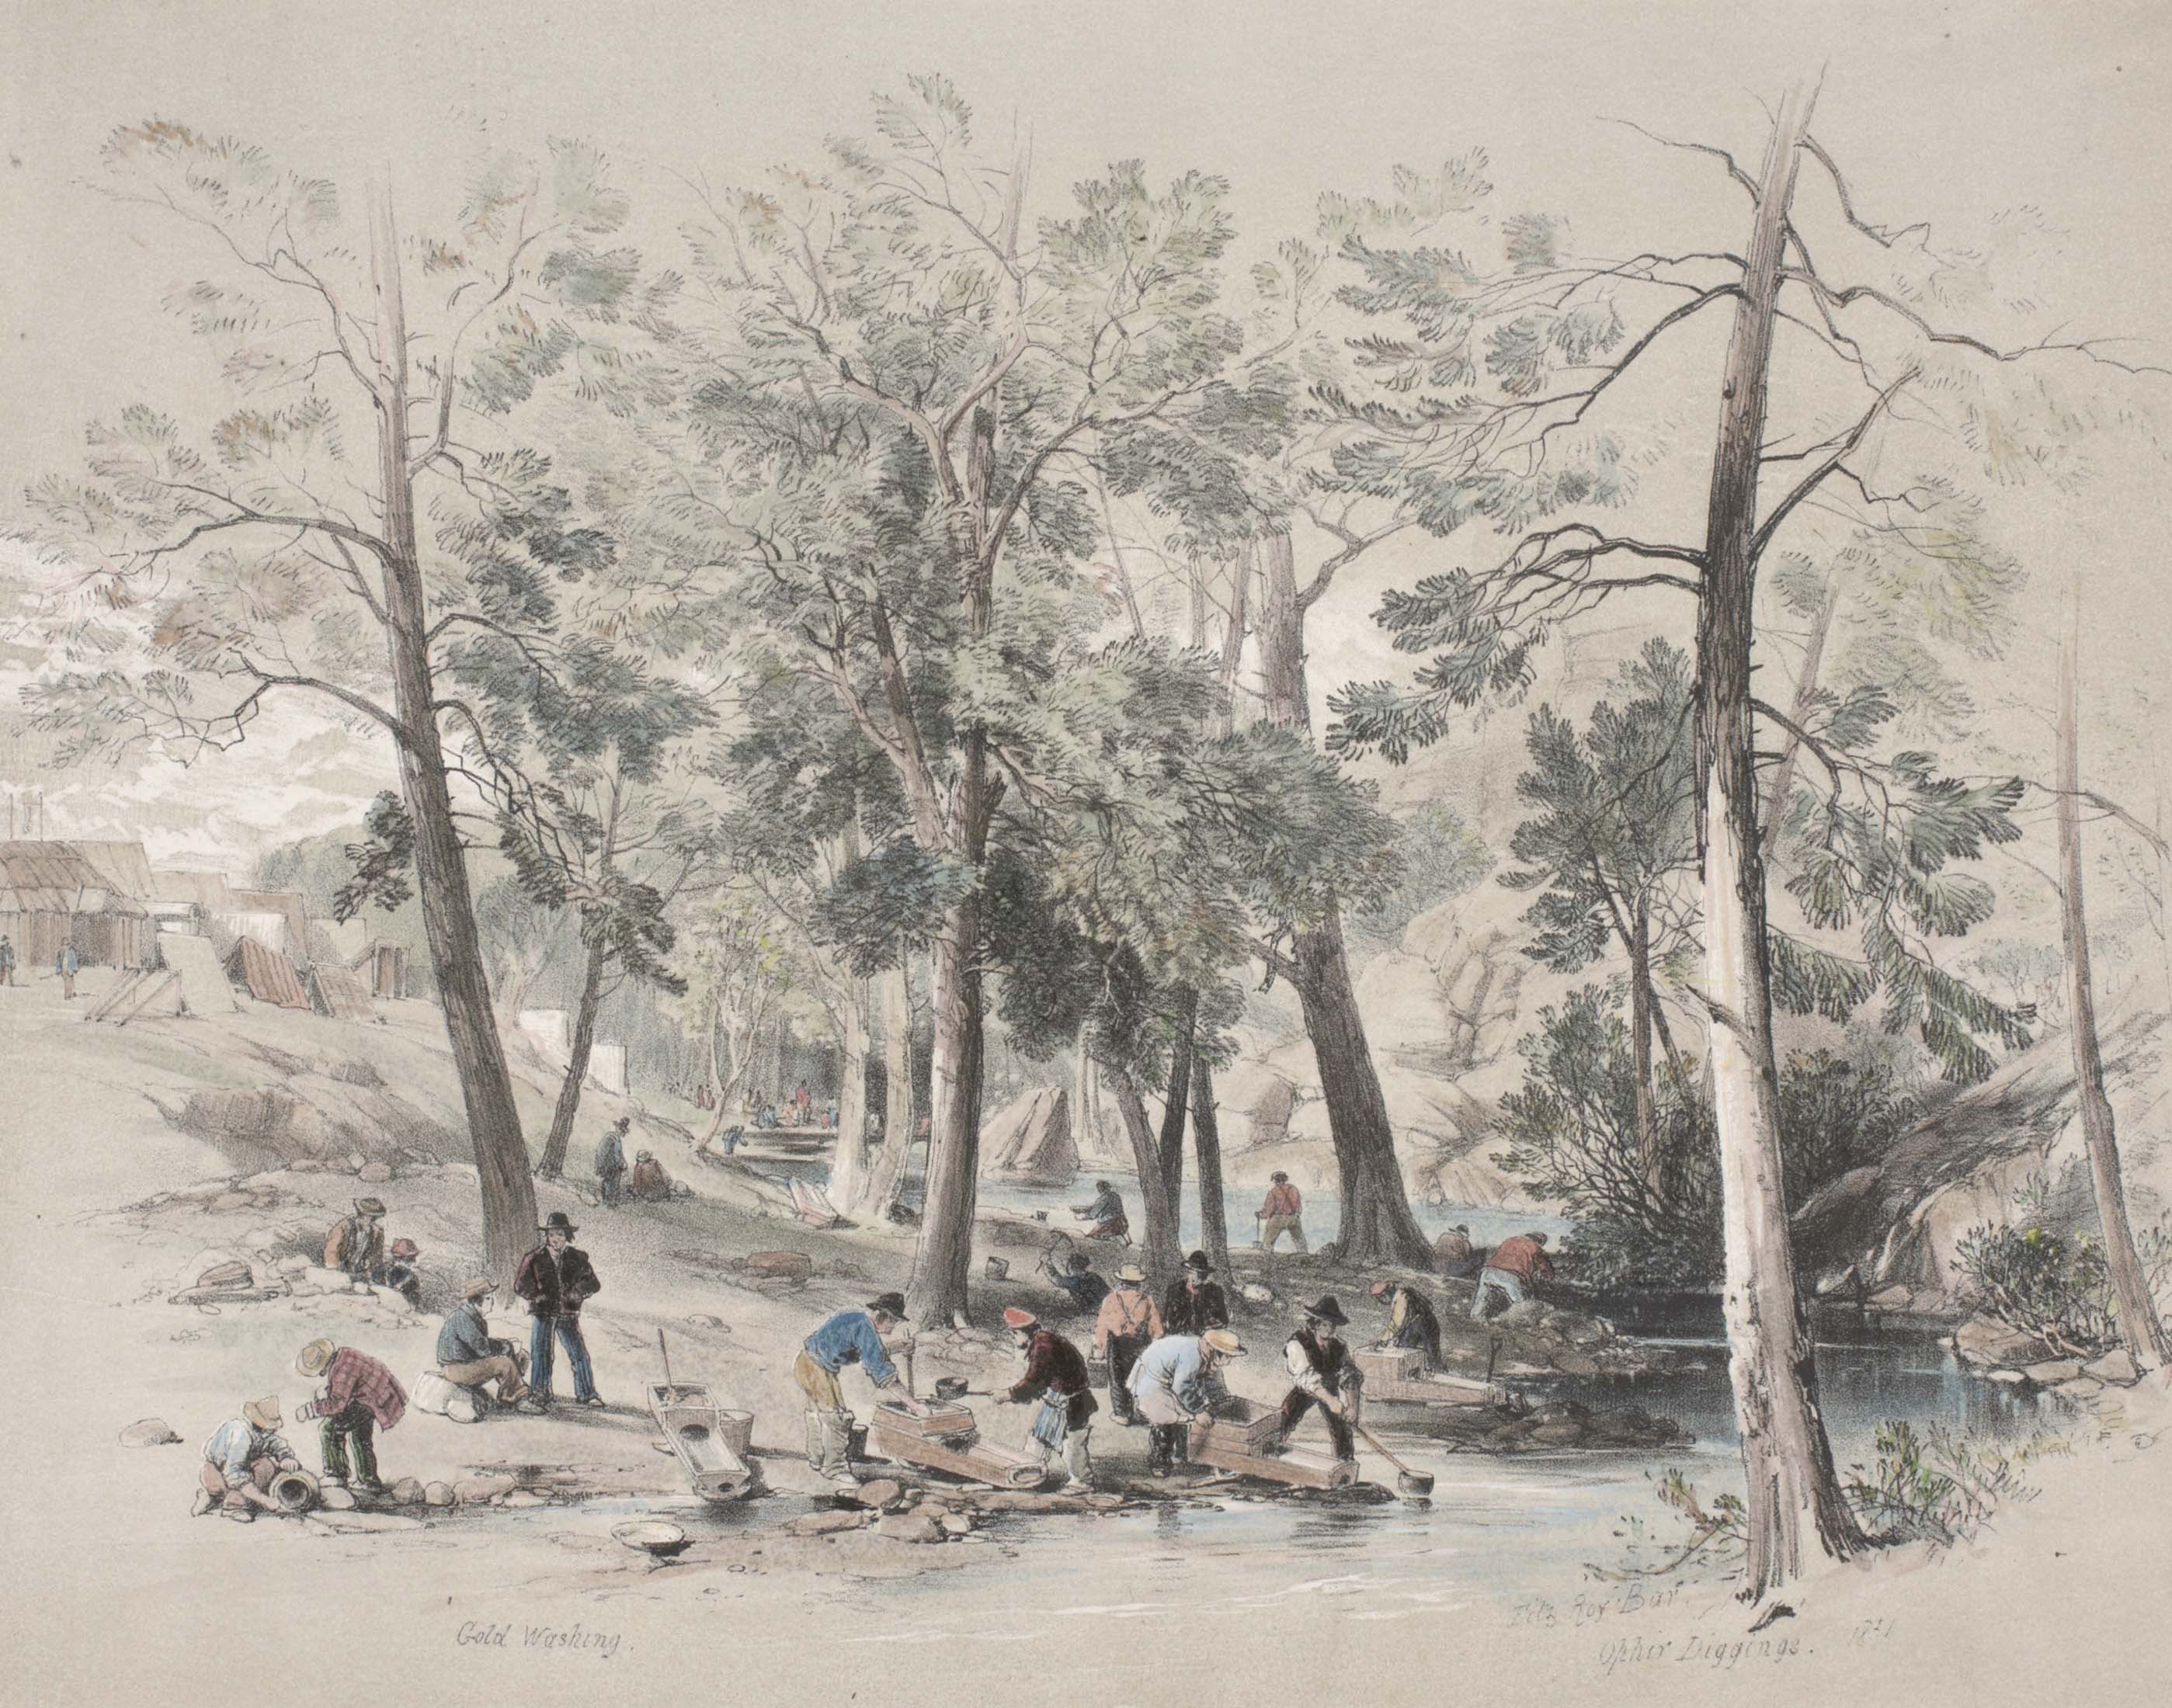 Gold Washing. Fitzroy Bar, Ophir Diggings, 1851, by George Angas.